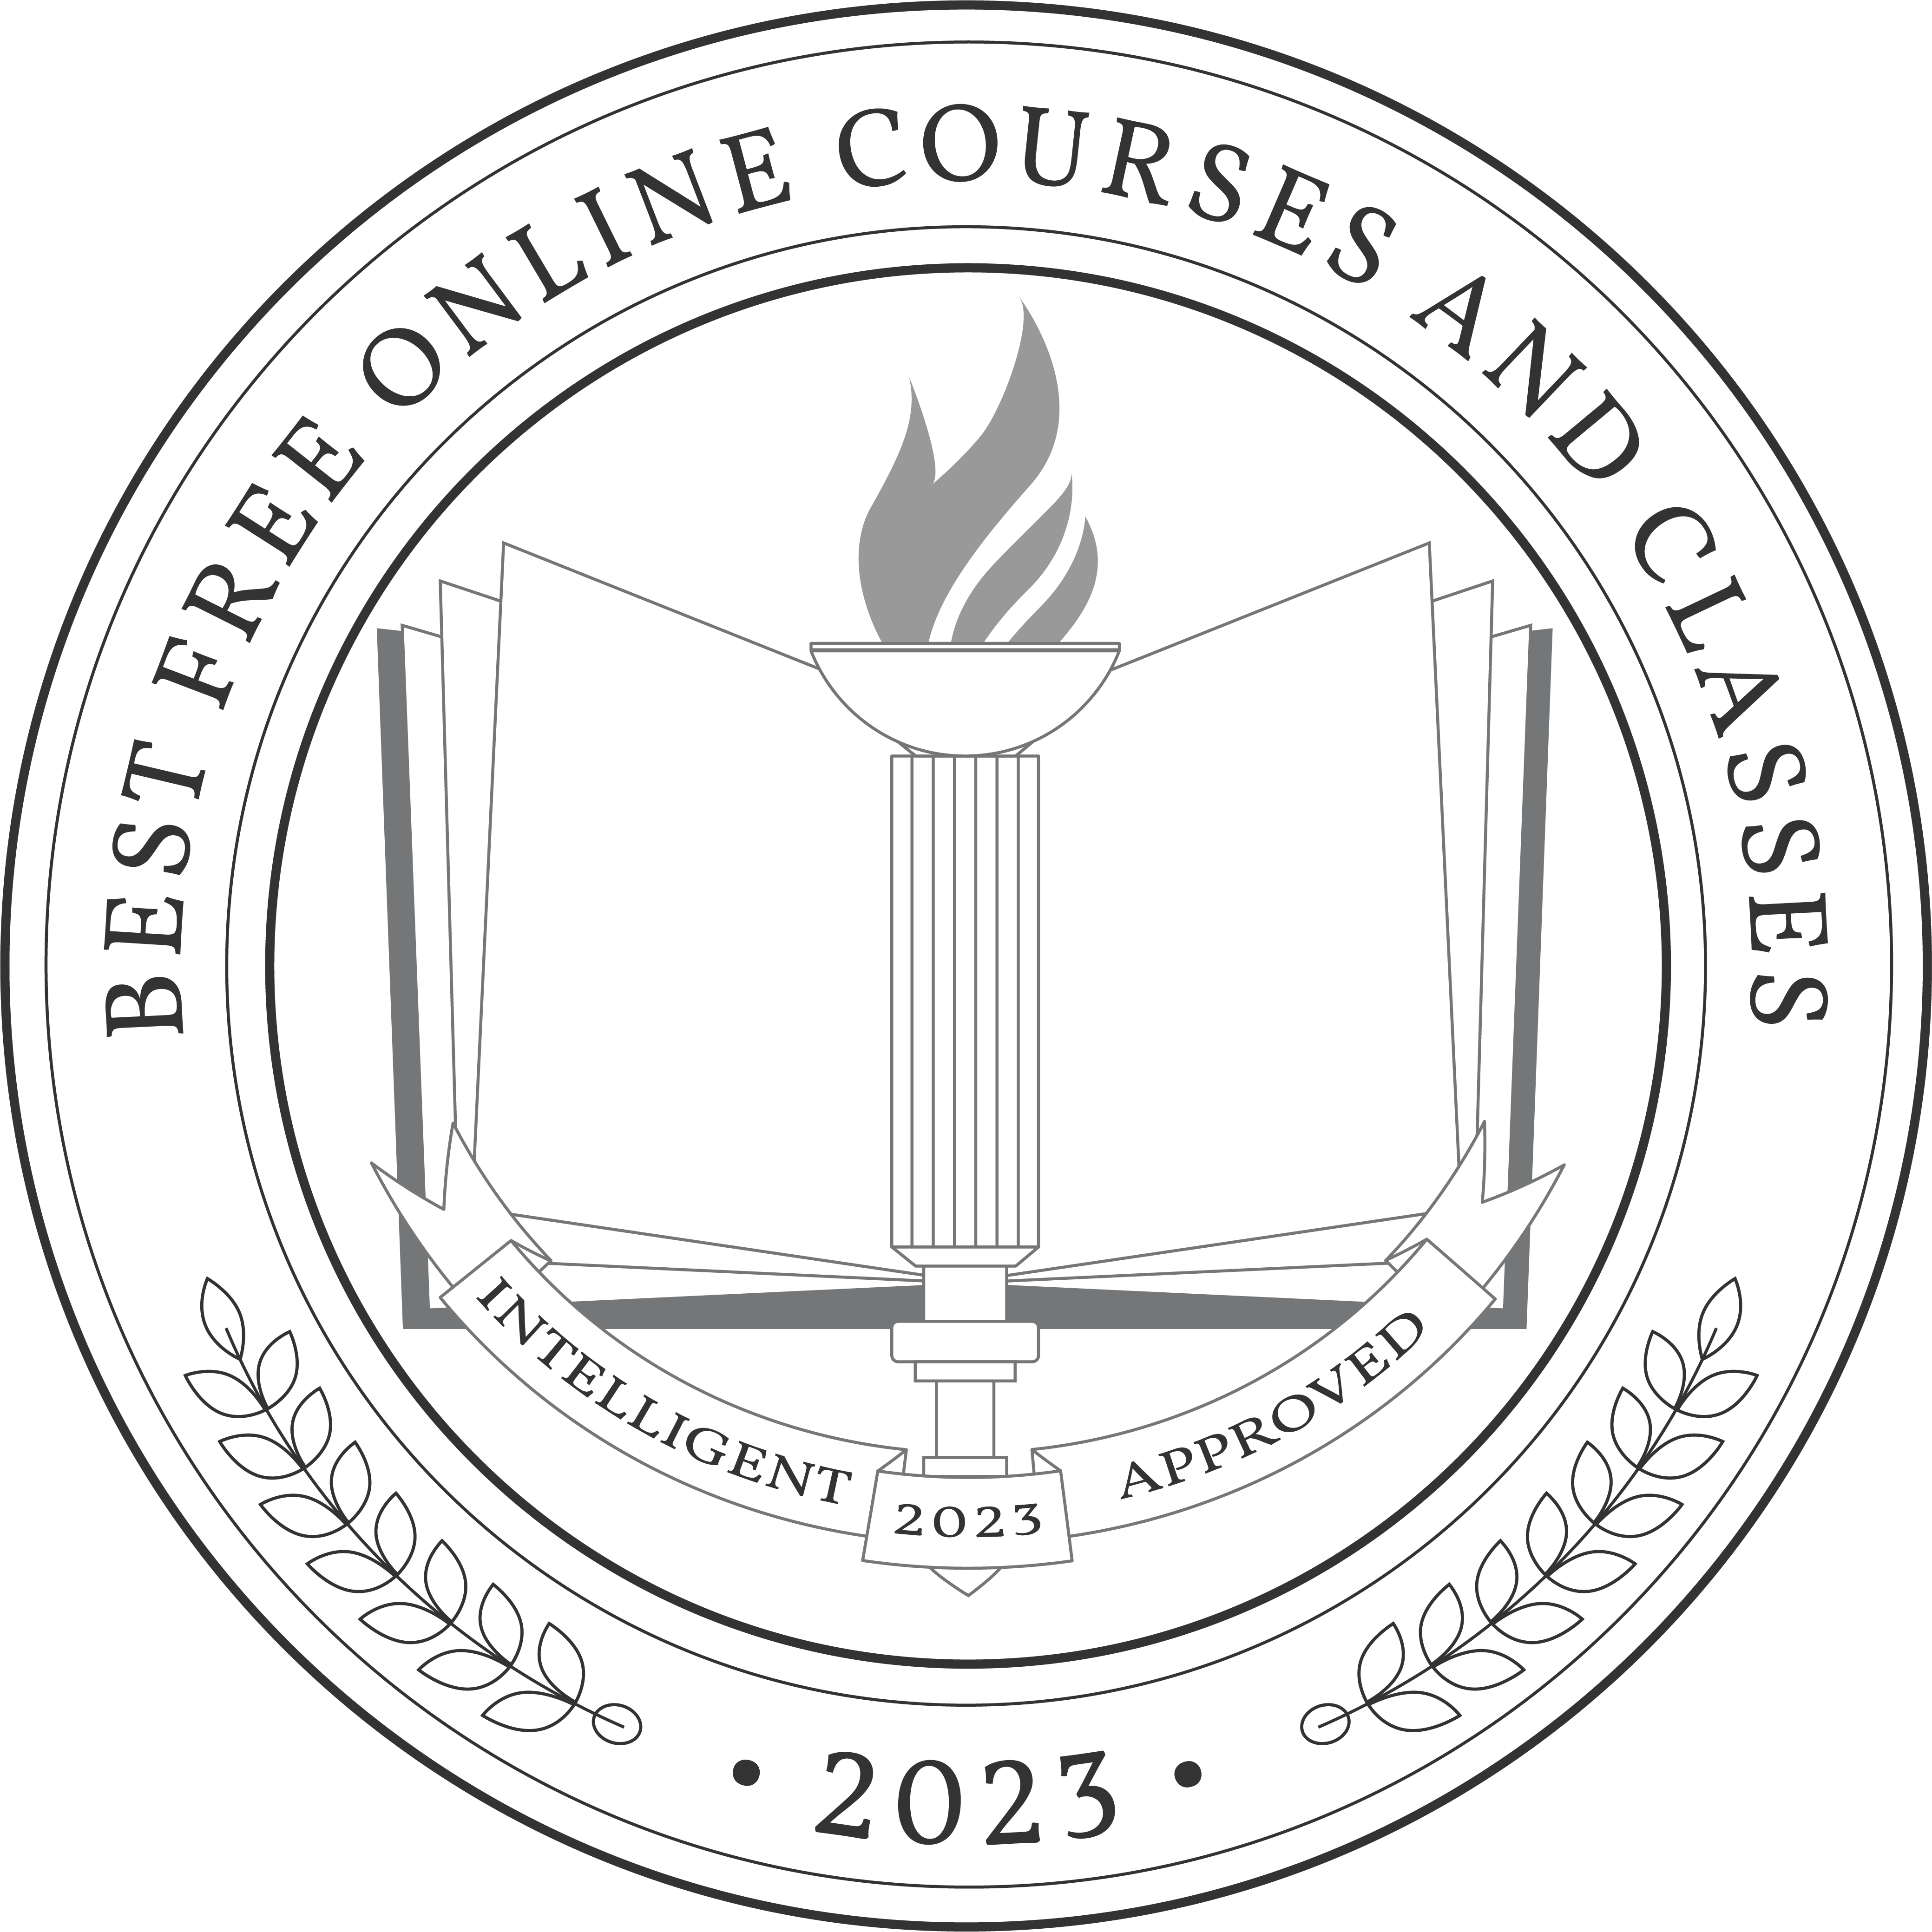 Best Free Online Courses And Classes Badge 2022